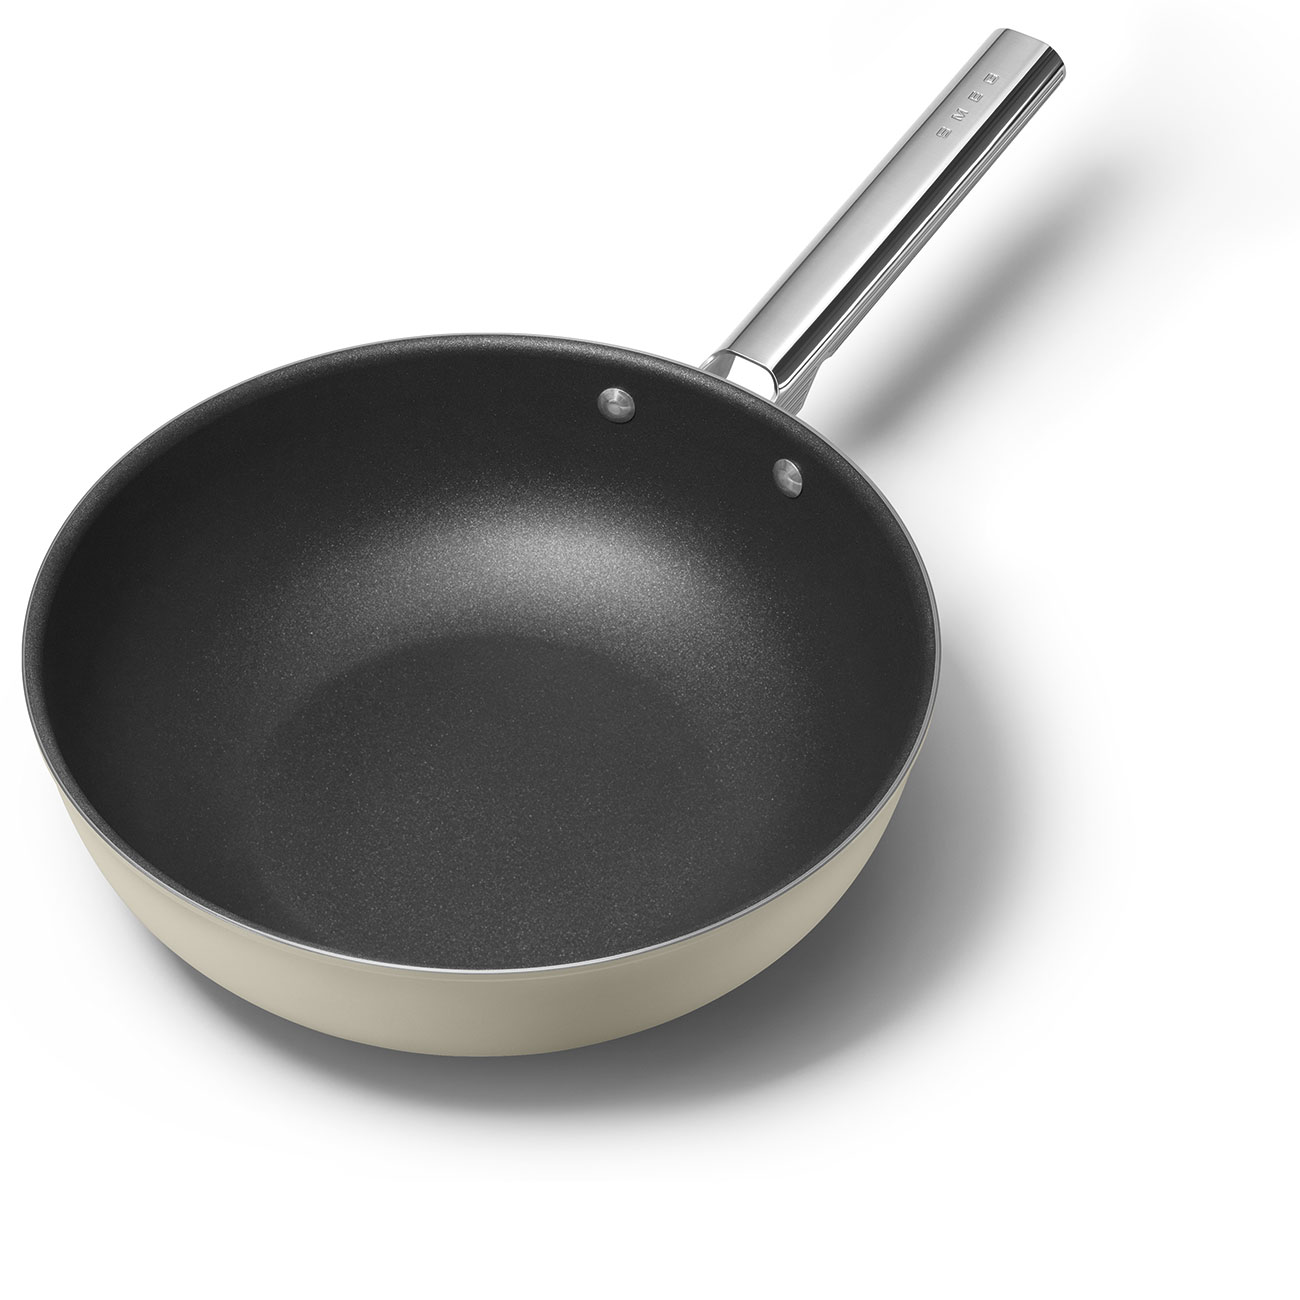 Smeg Cream Non-stick Wok with Stainless Steel Handle - CKFW3001CRM_3